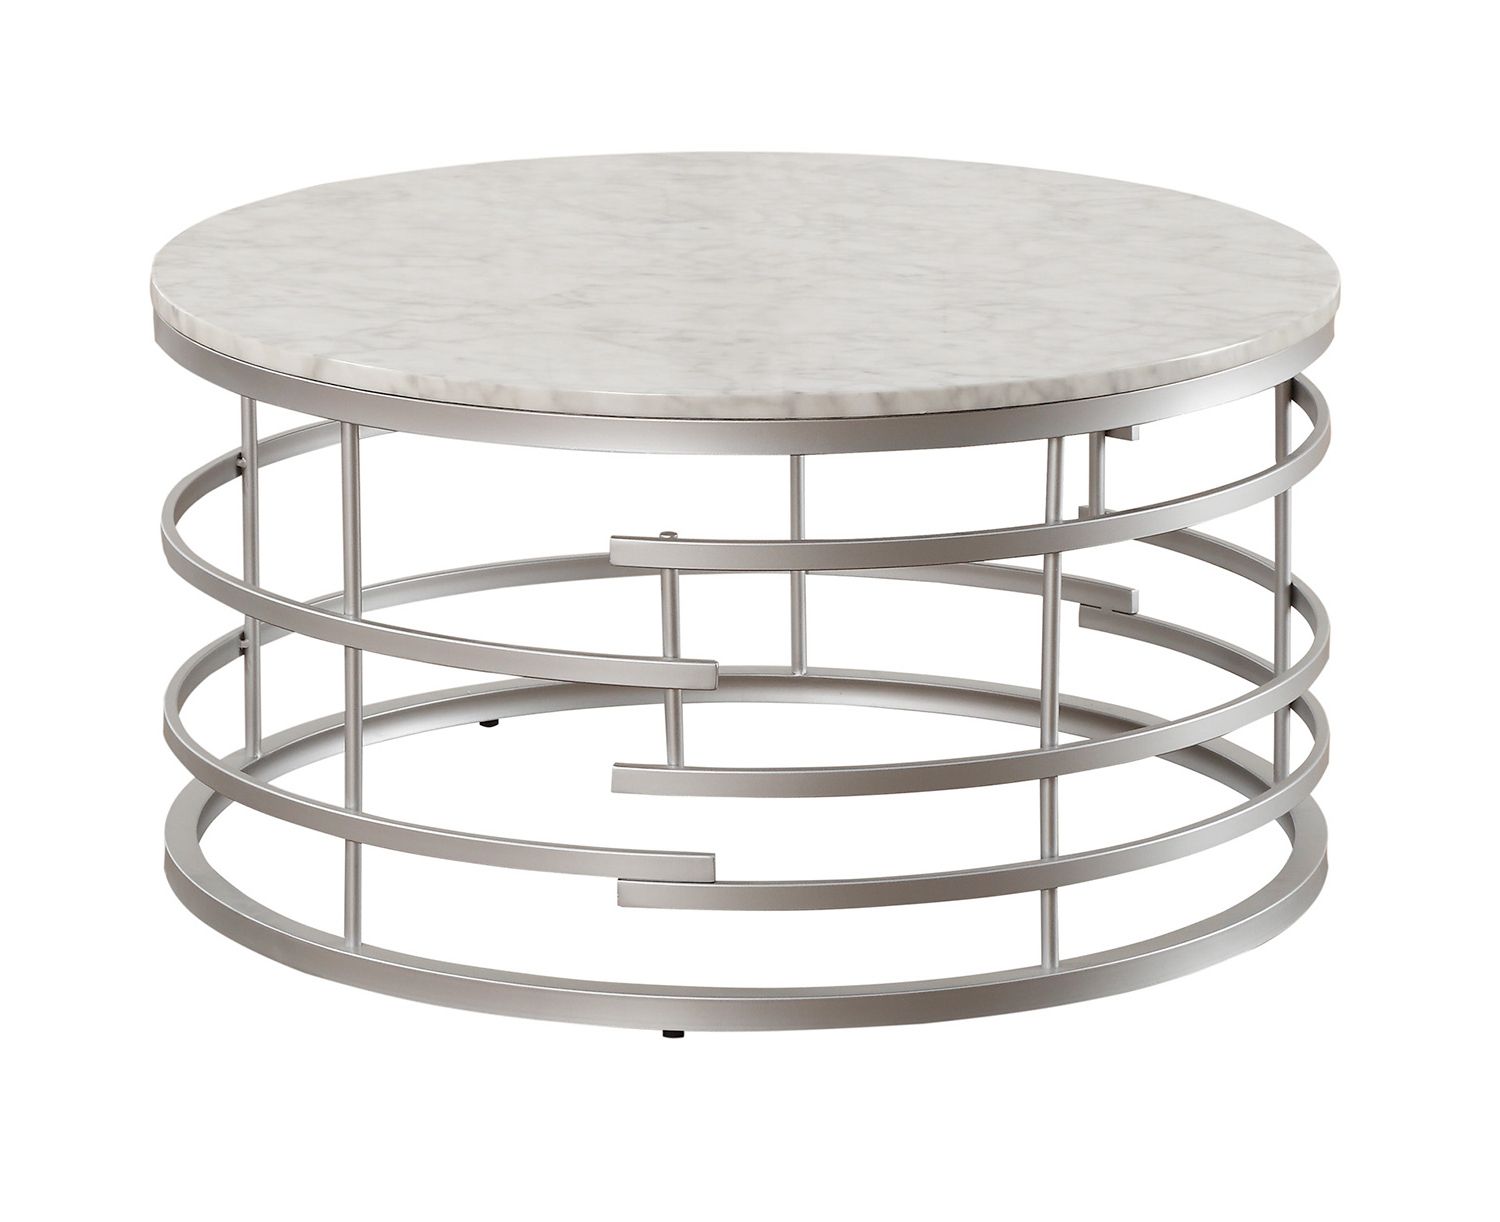 Homelegance Brassica Round Cocktail/coffee Table With Faux Within Most Current Faux White Marble And Metal Coffee Tables (Gallery 20 of 20)